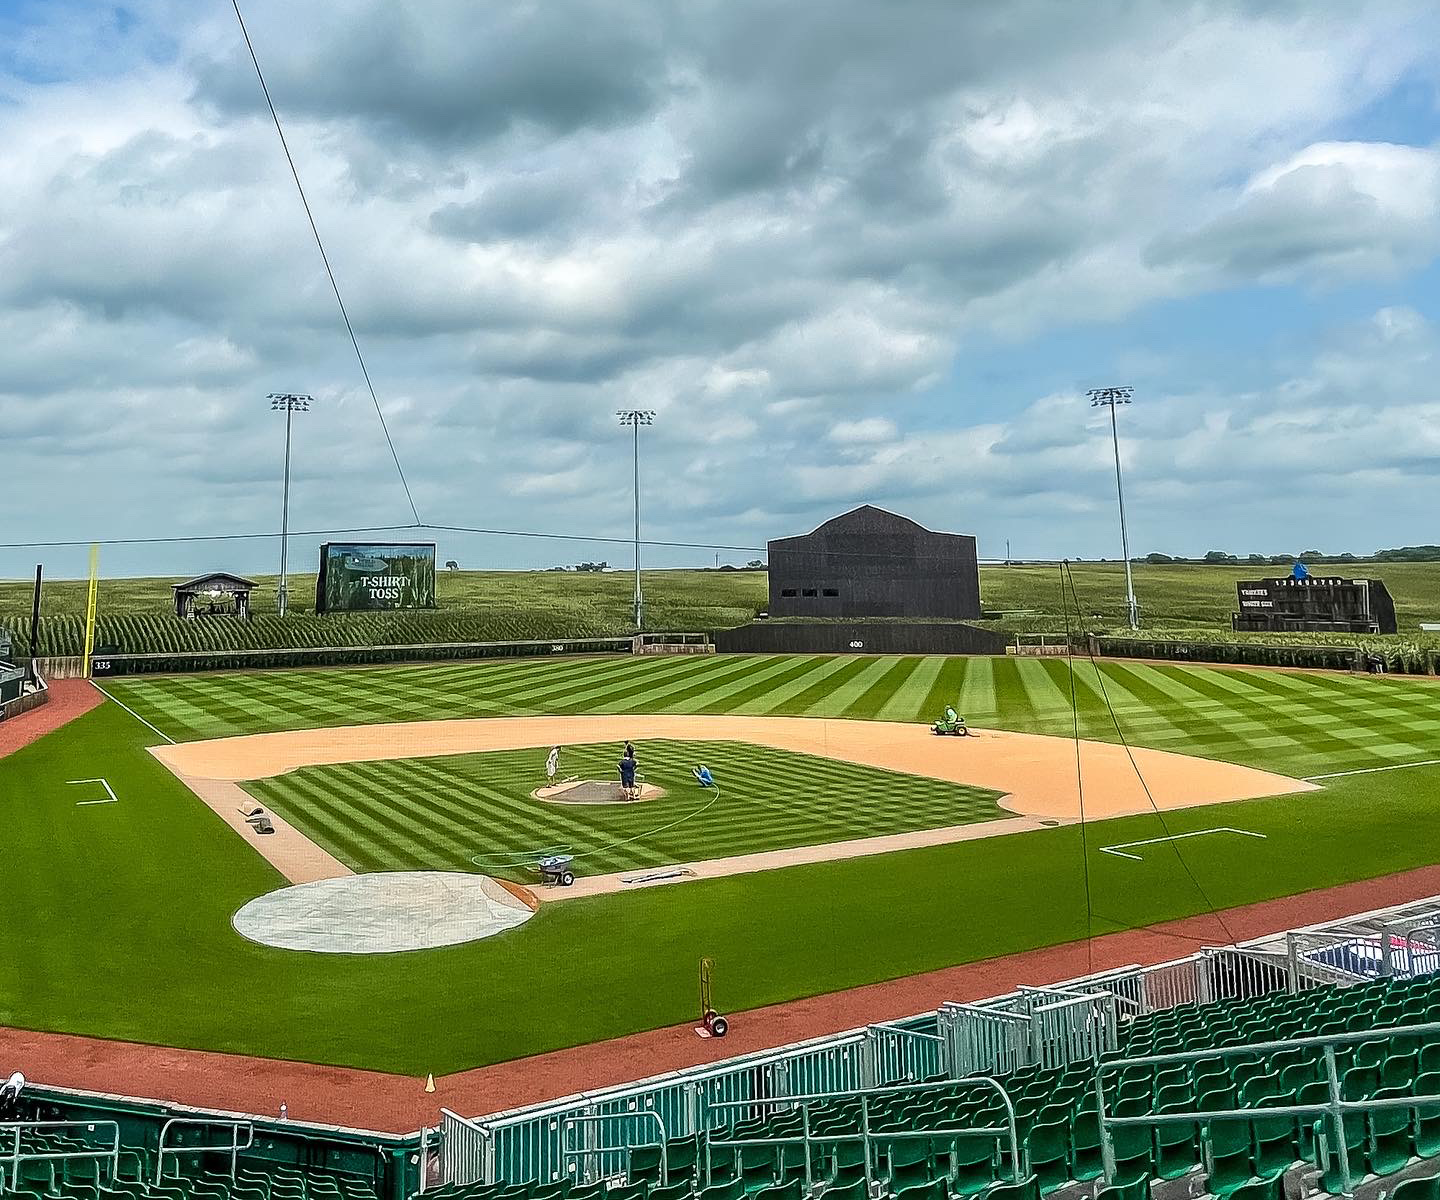 Live From MLB at Field of Dreams: Sports Meets Cinema as Fox Sports  Delivers Epic 4K HDR Production